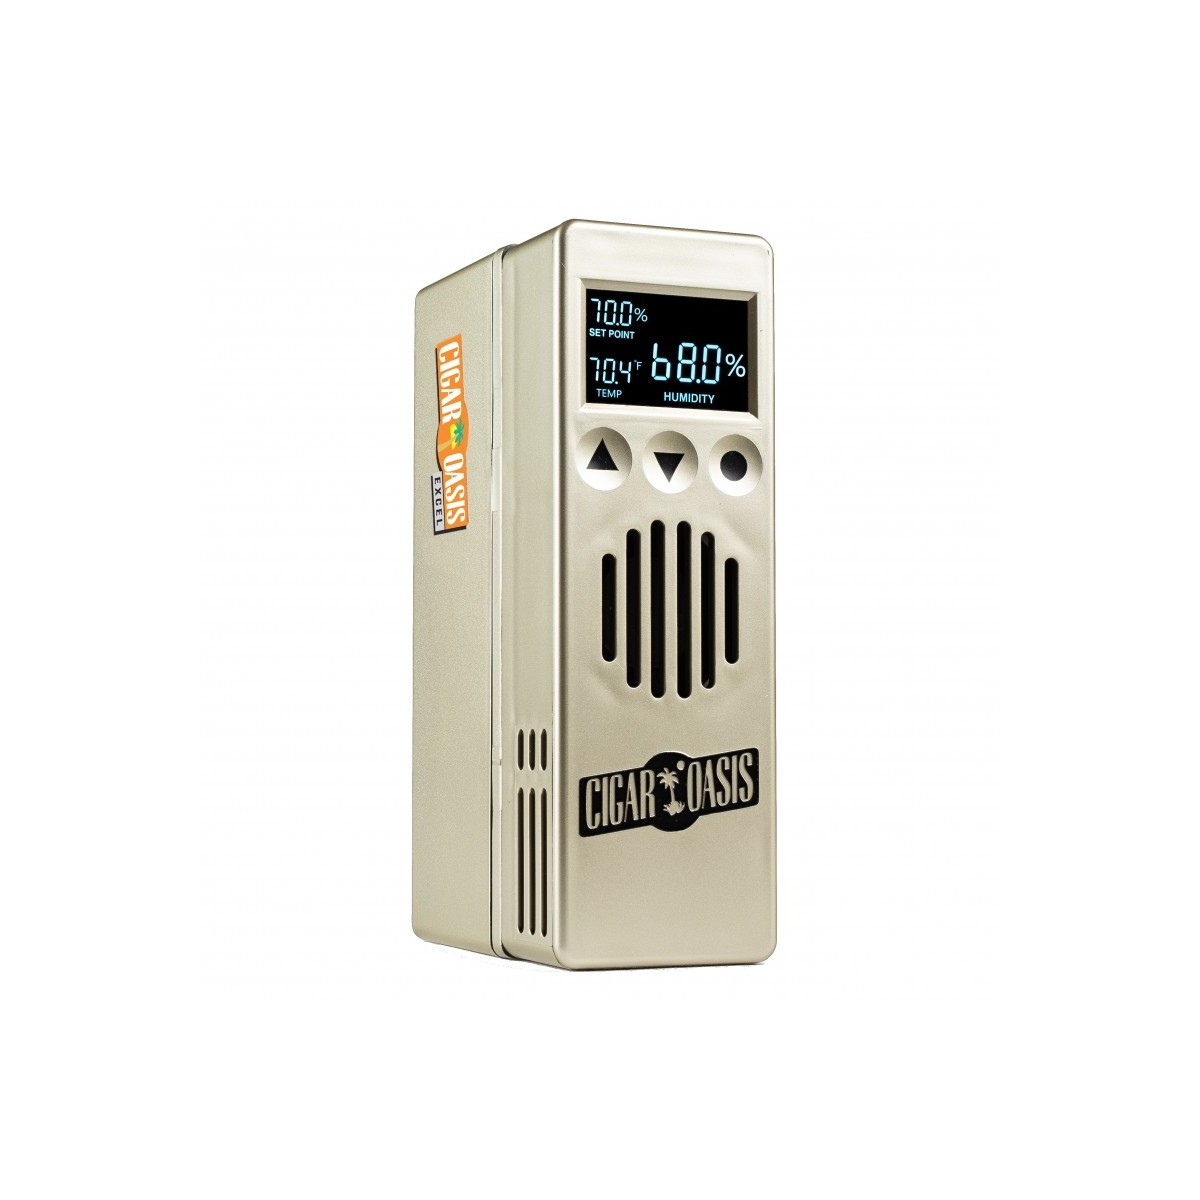 Humidificateur Cigar OASIS EXCEL 3.0